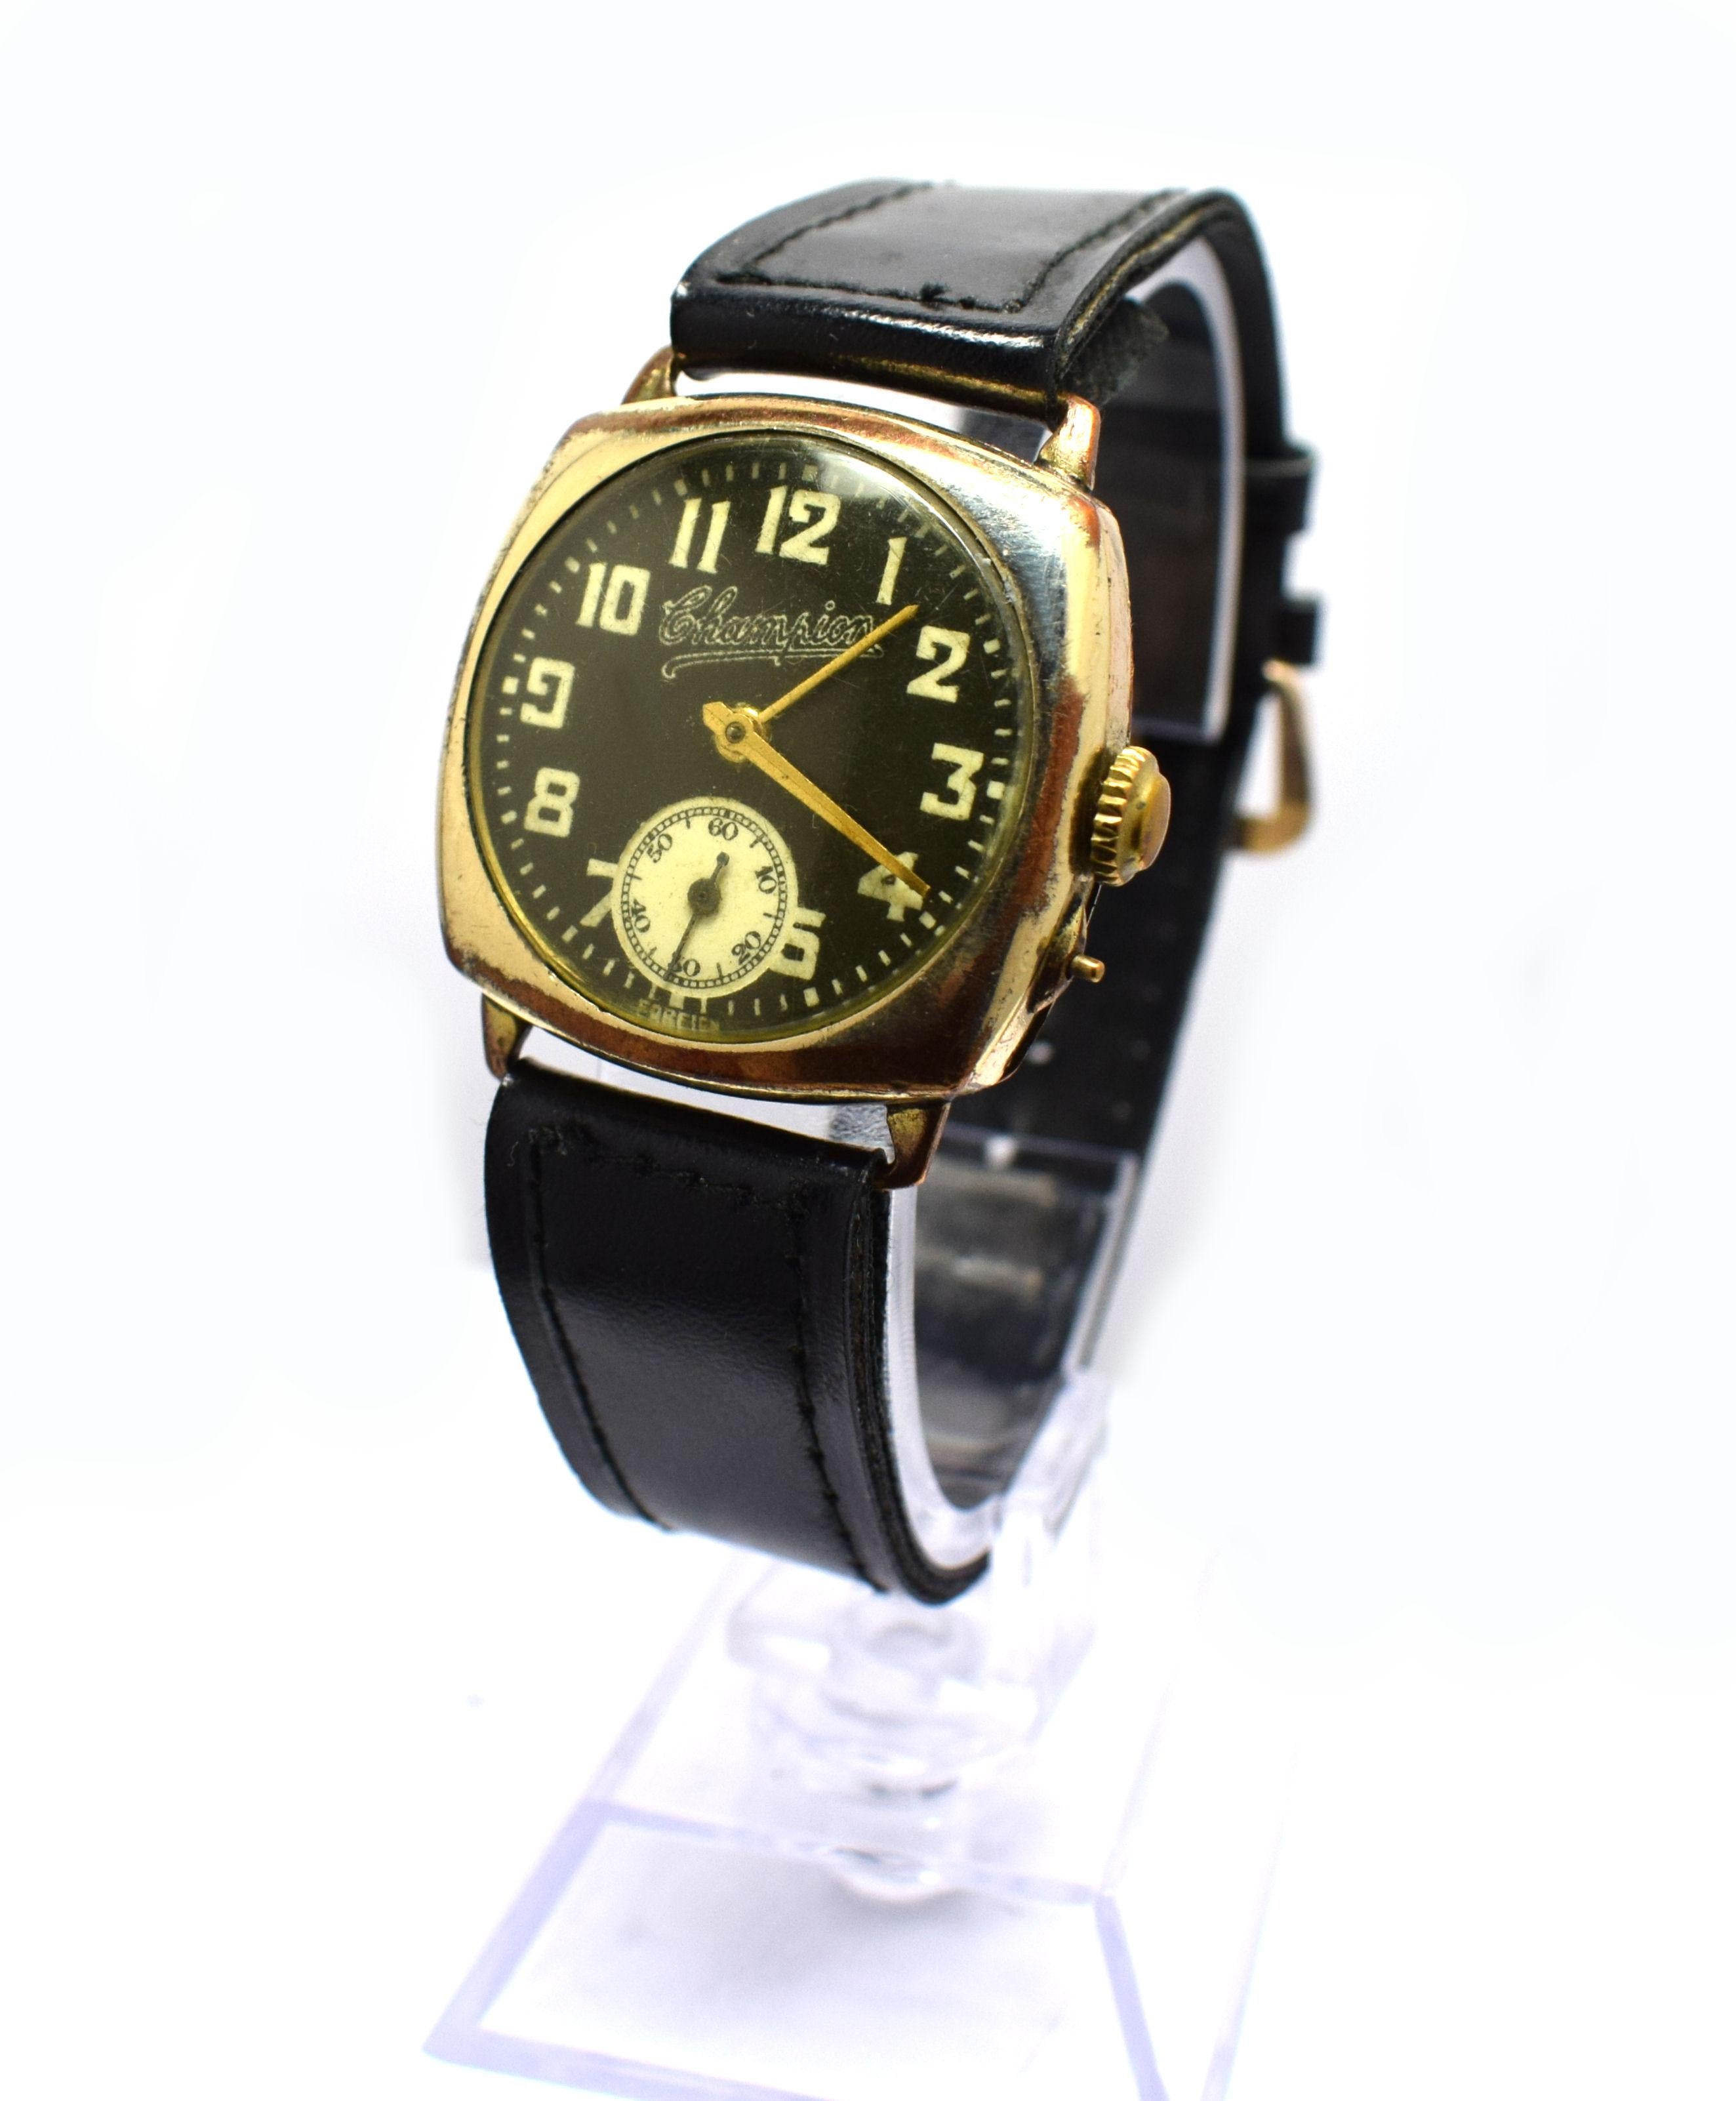 1930s Champion Art Deco Men's Gold-Plated Cushion Watch 6